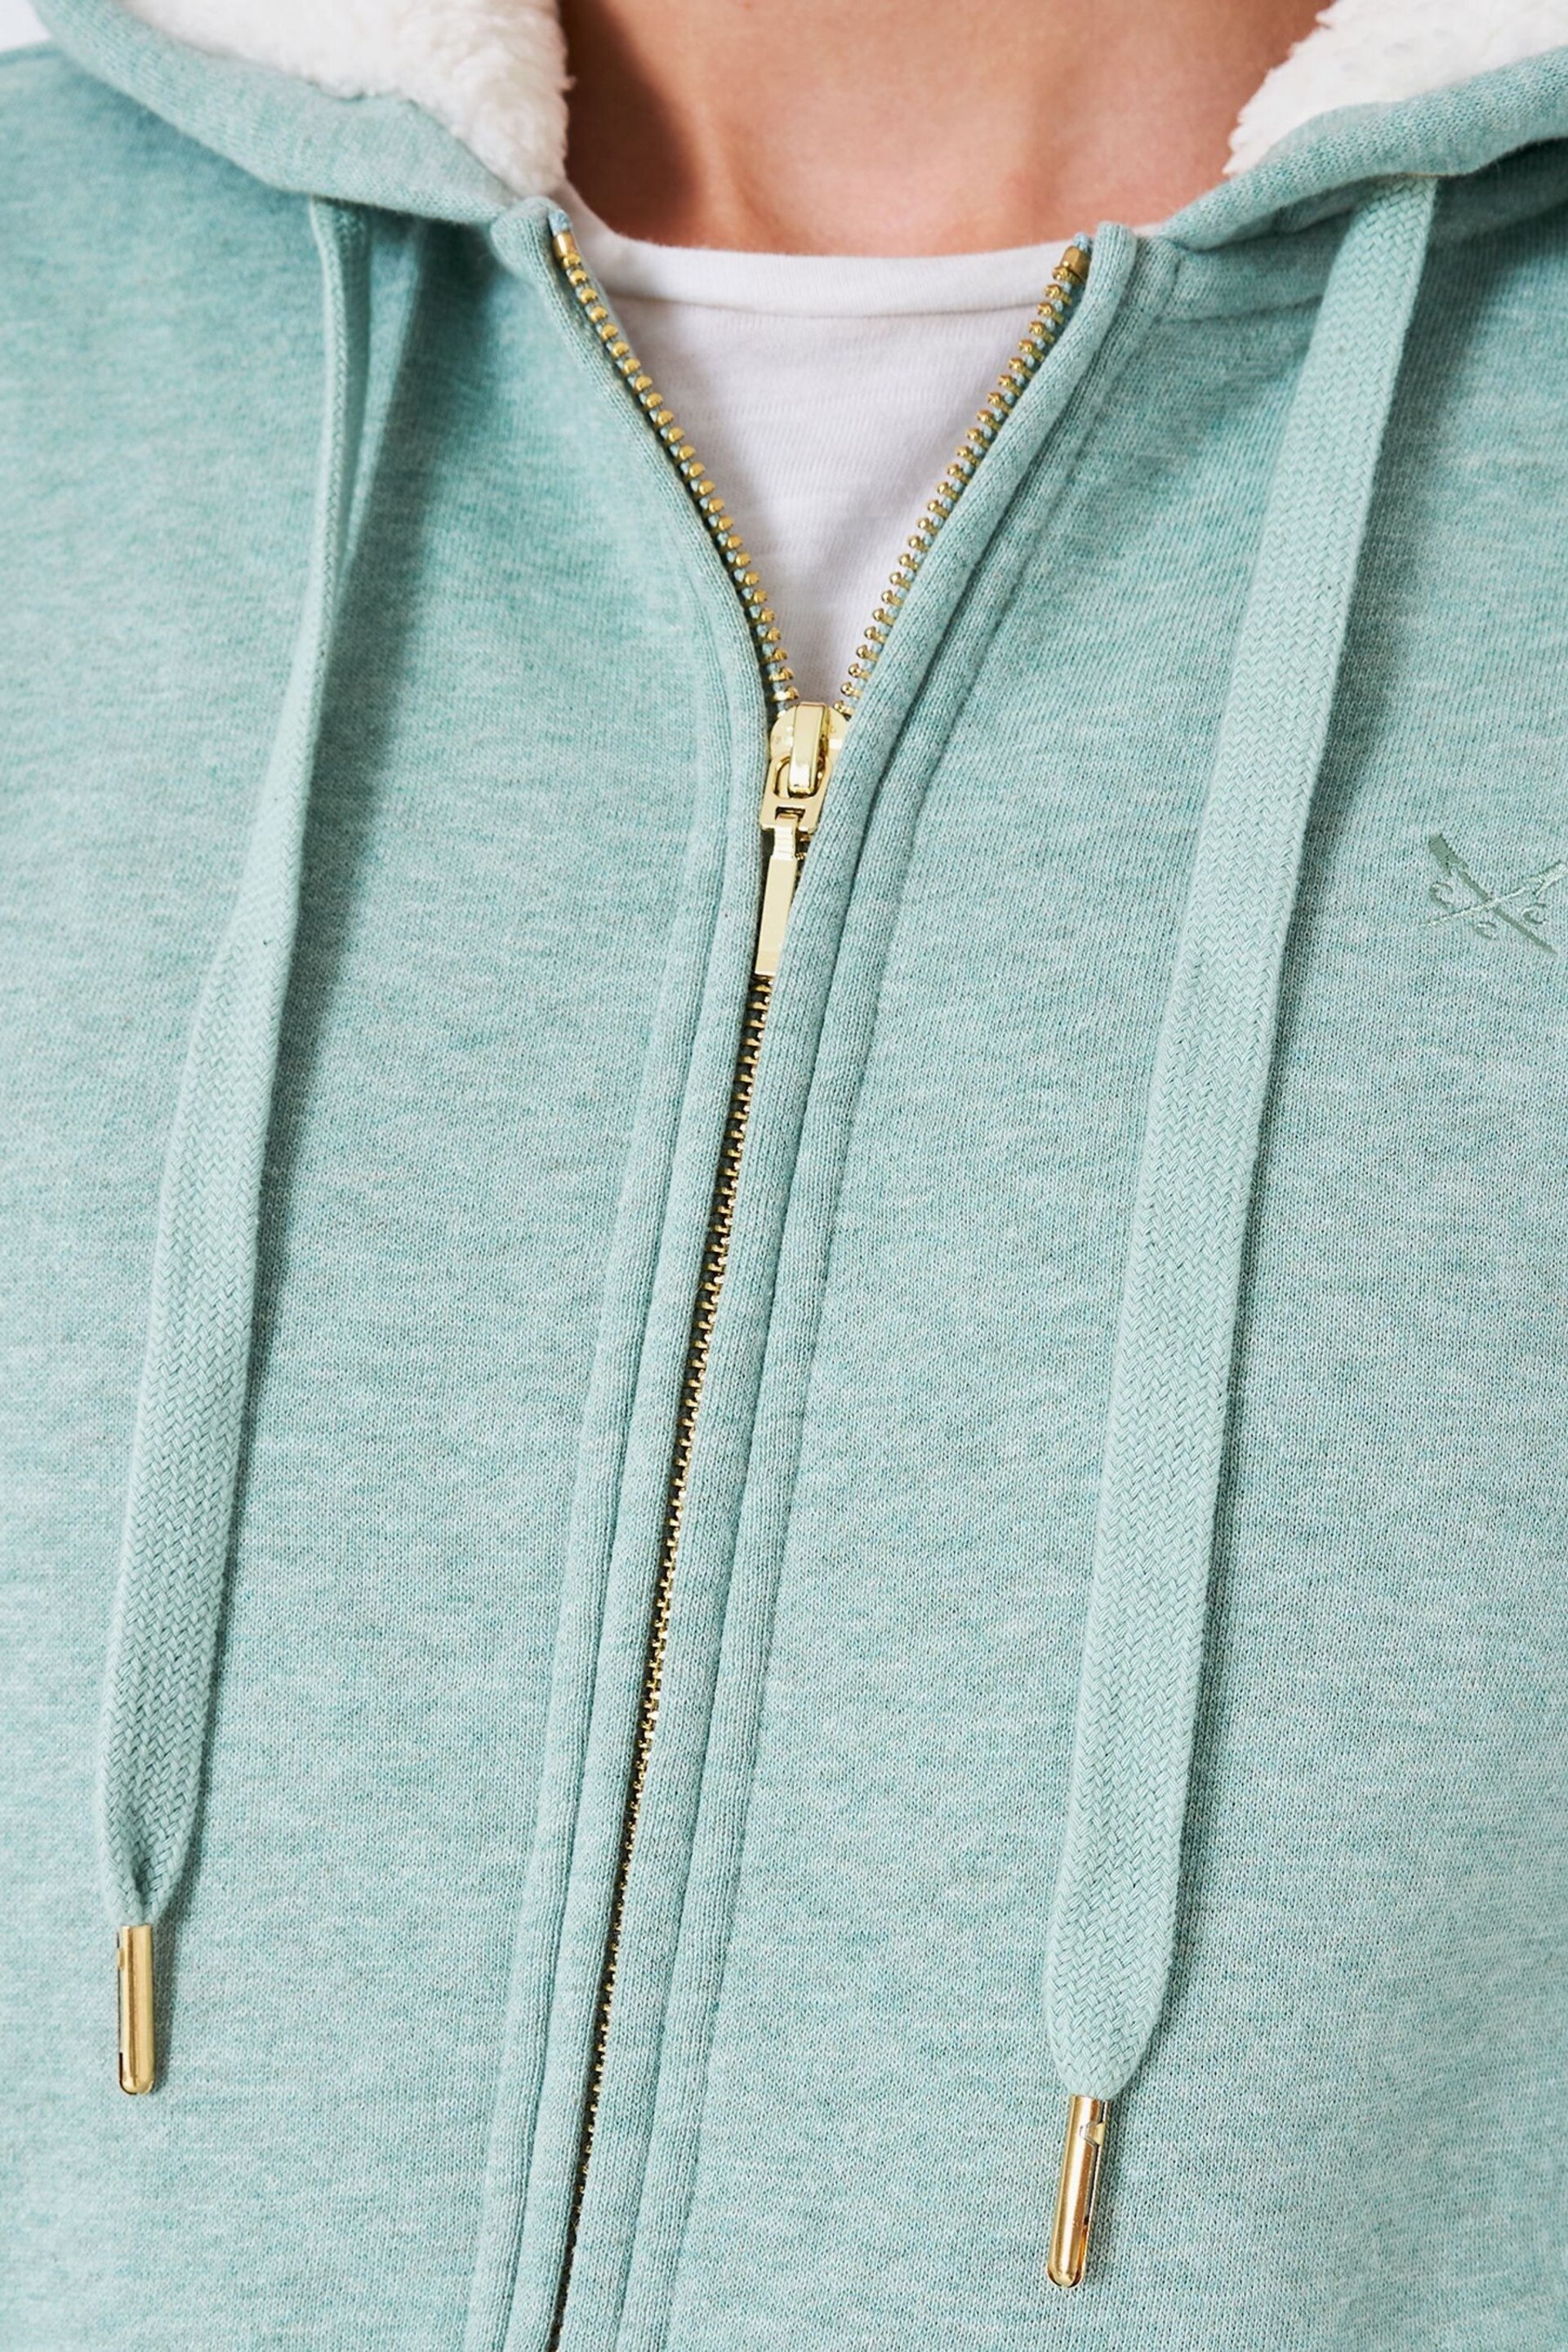 Crew Clothing Borg Lined Zip Through Hoodie - Image 4 of 5